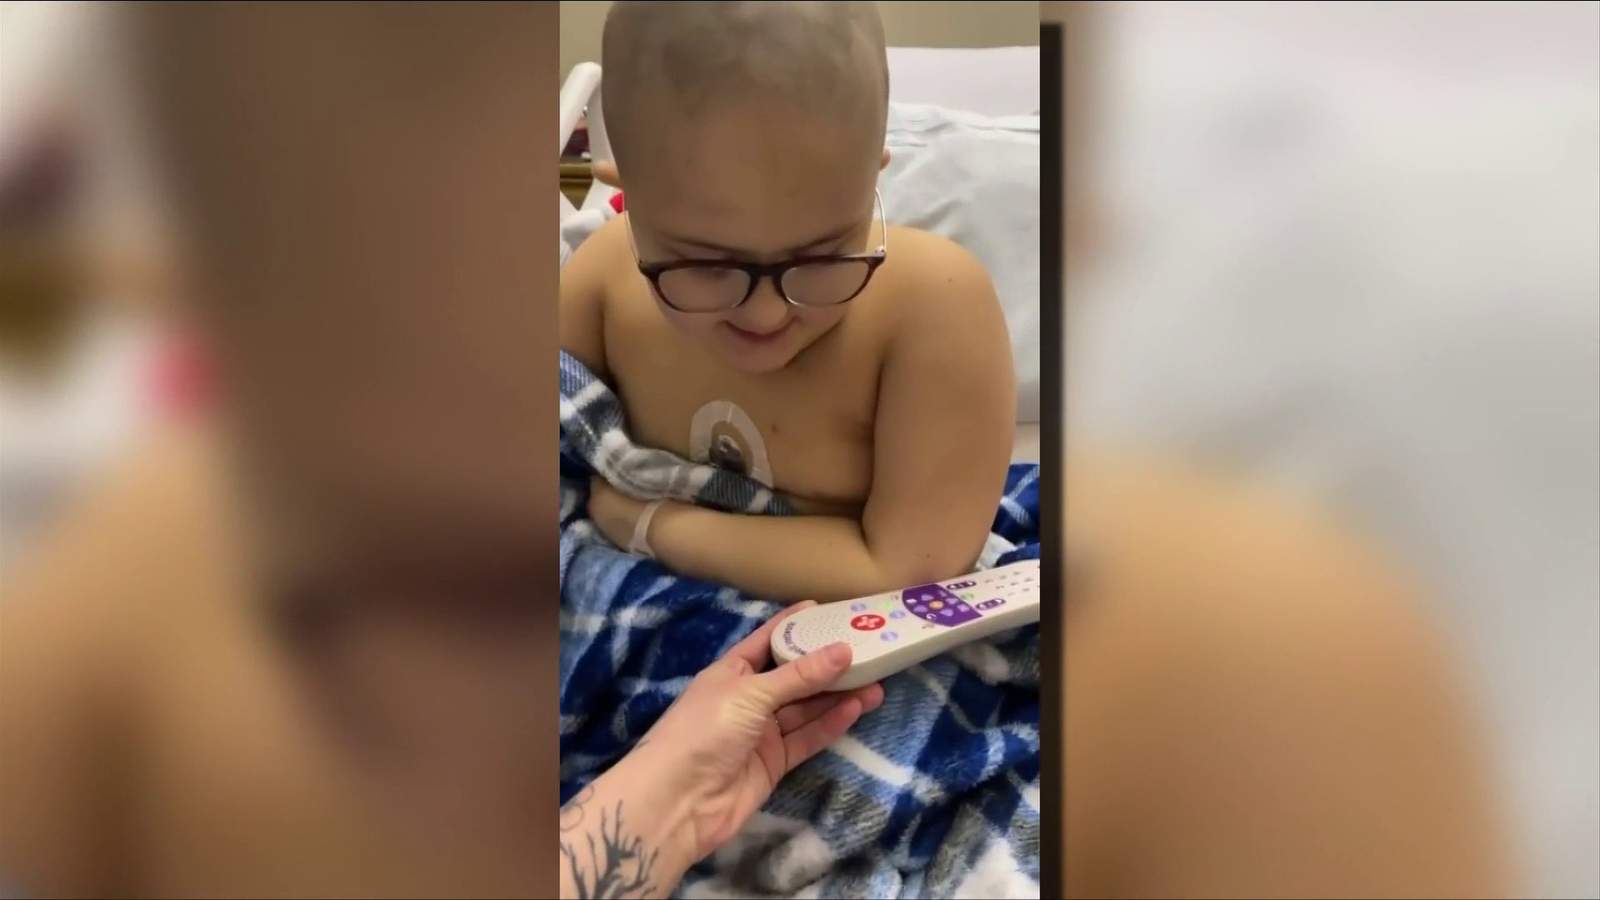 Here’s how you can help keep a Galax boy with cancer smiling with cards of hope